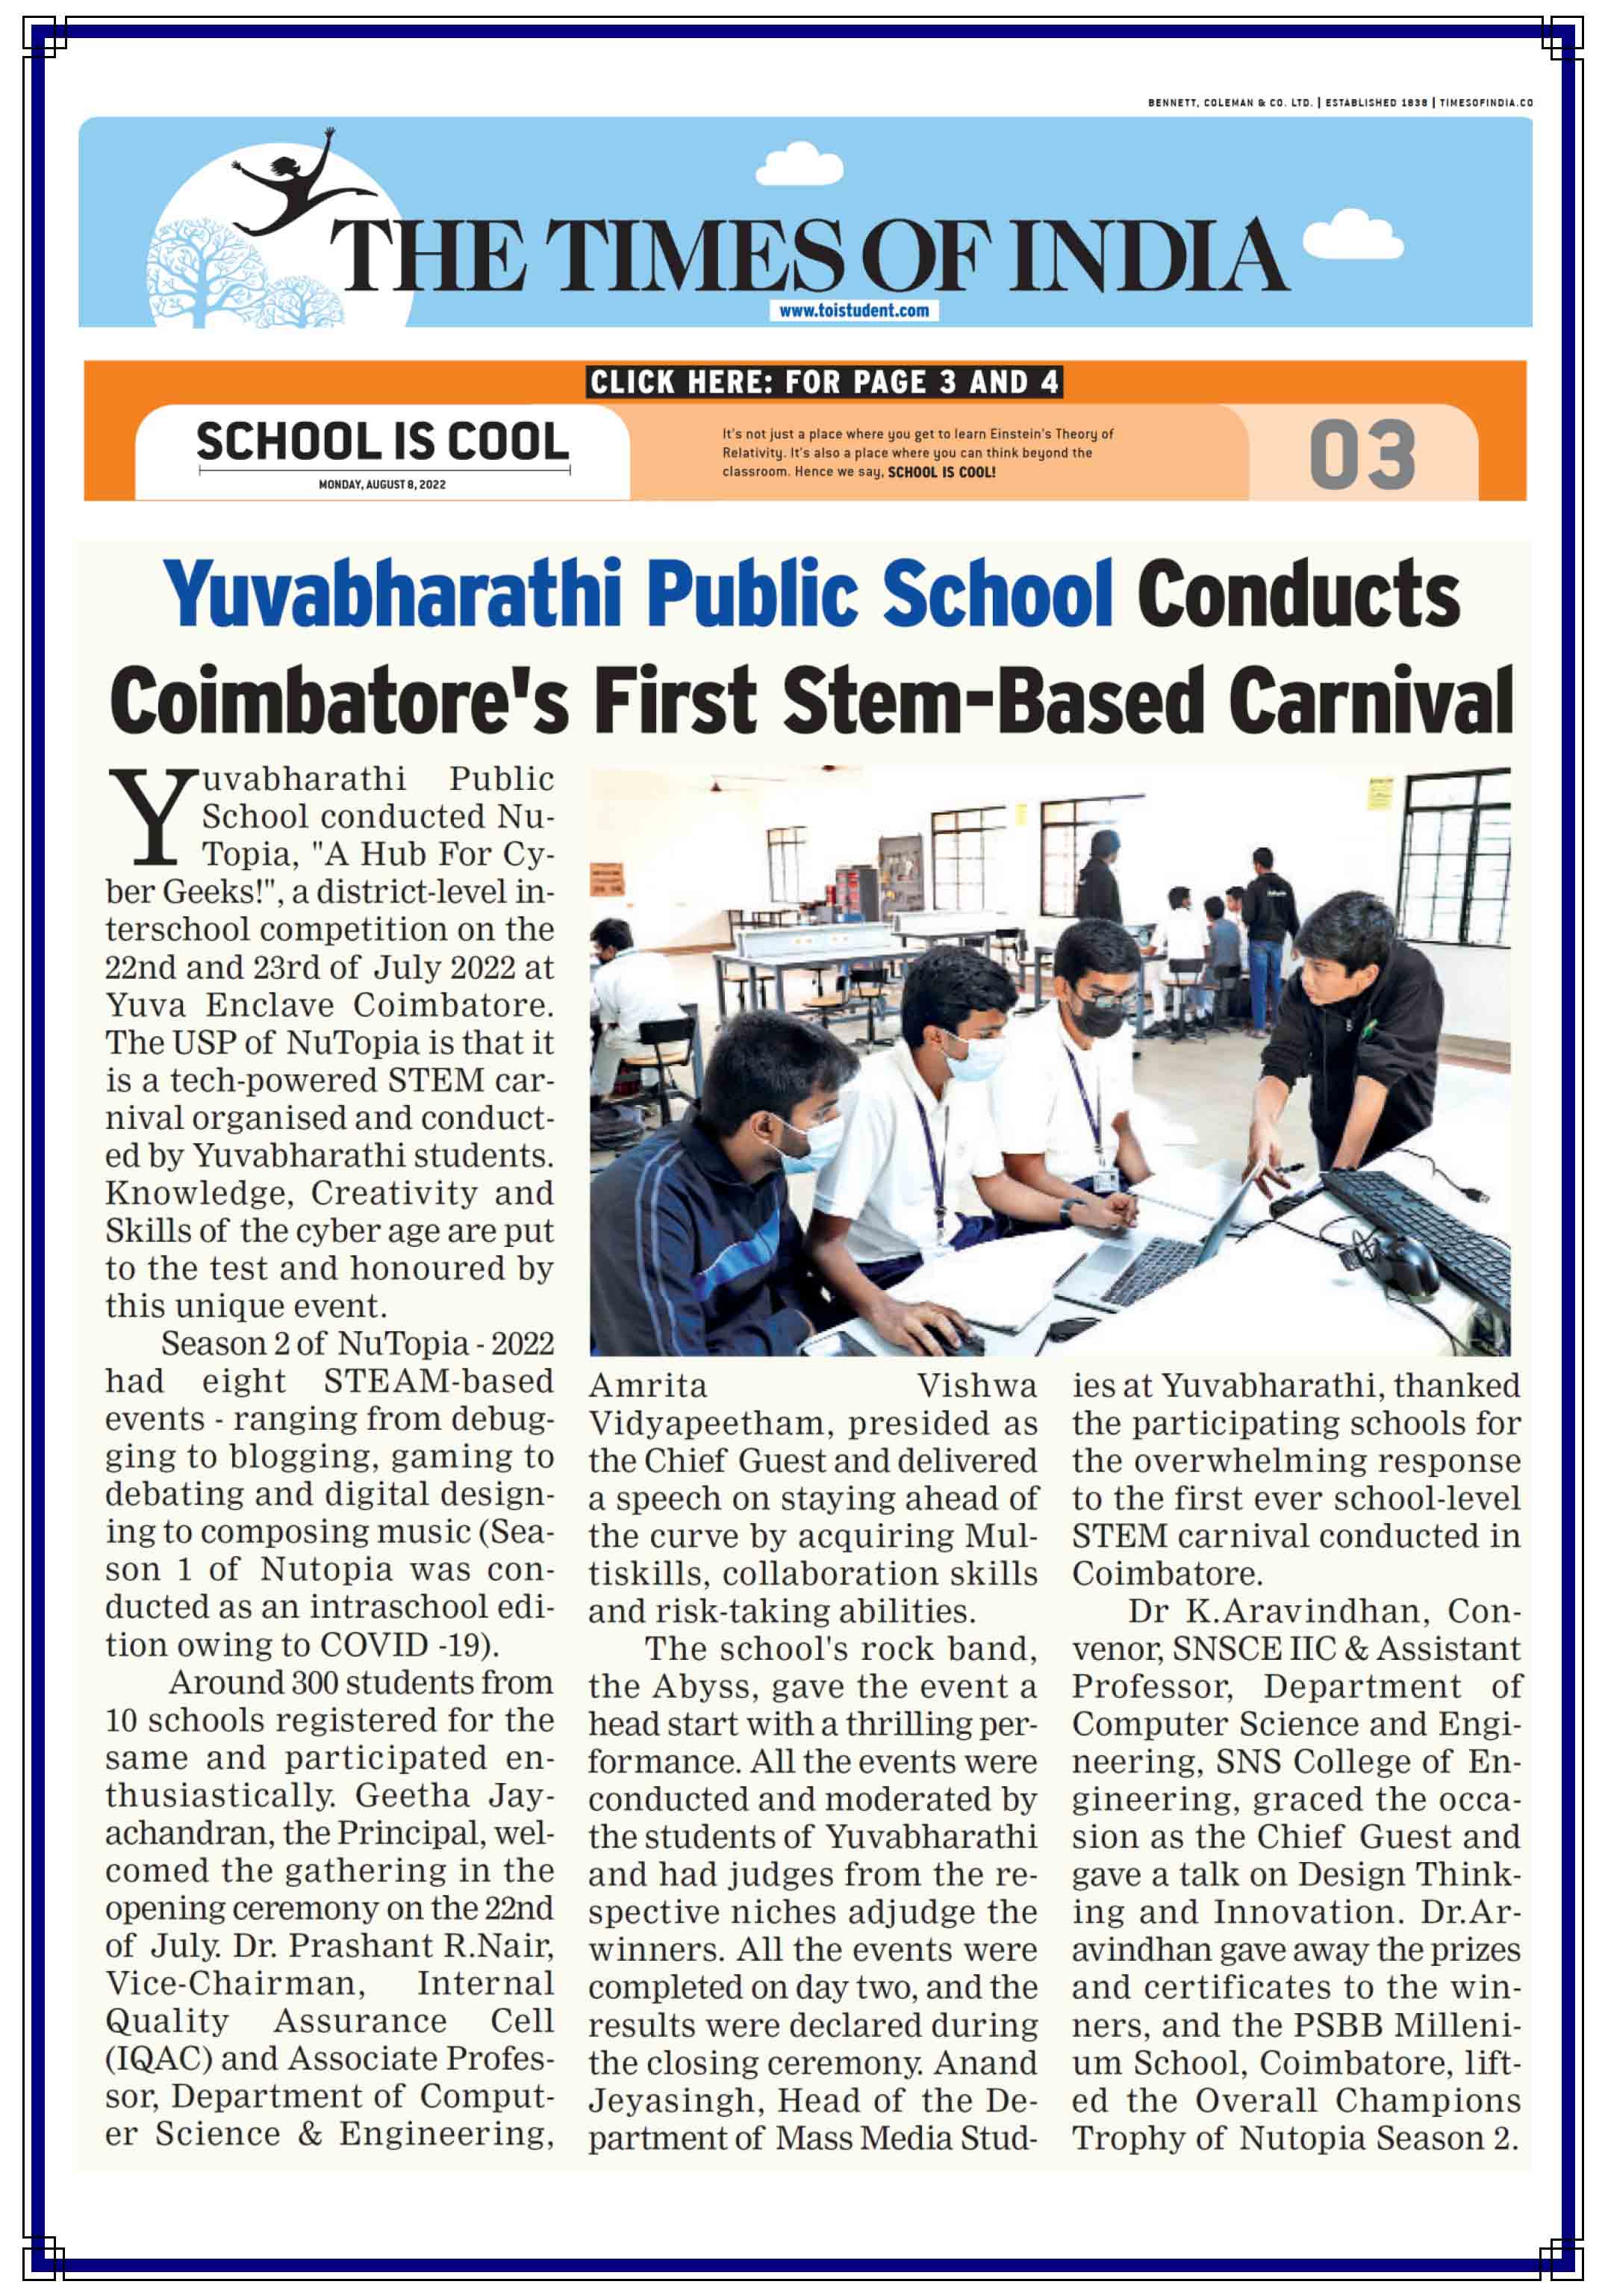 Yuvabharathi First STEM -based Carnival | The Times of India dated 08.08.2022